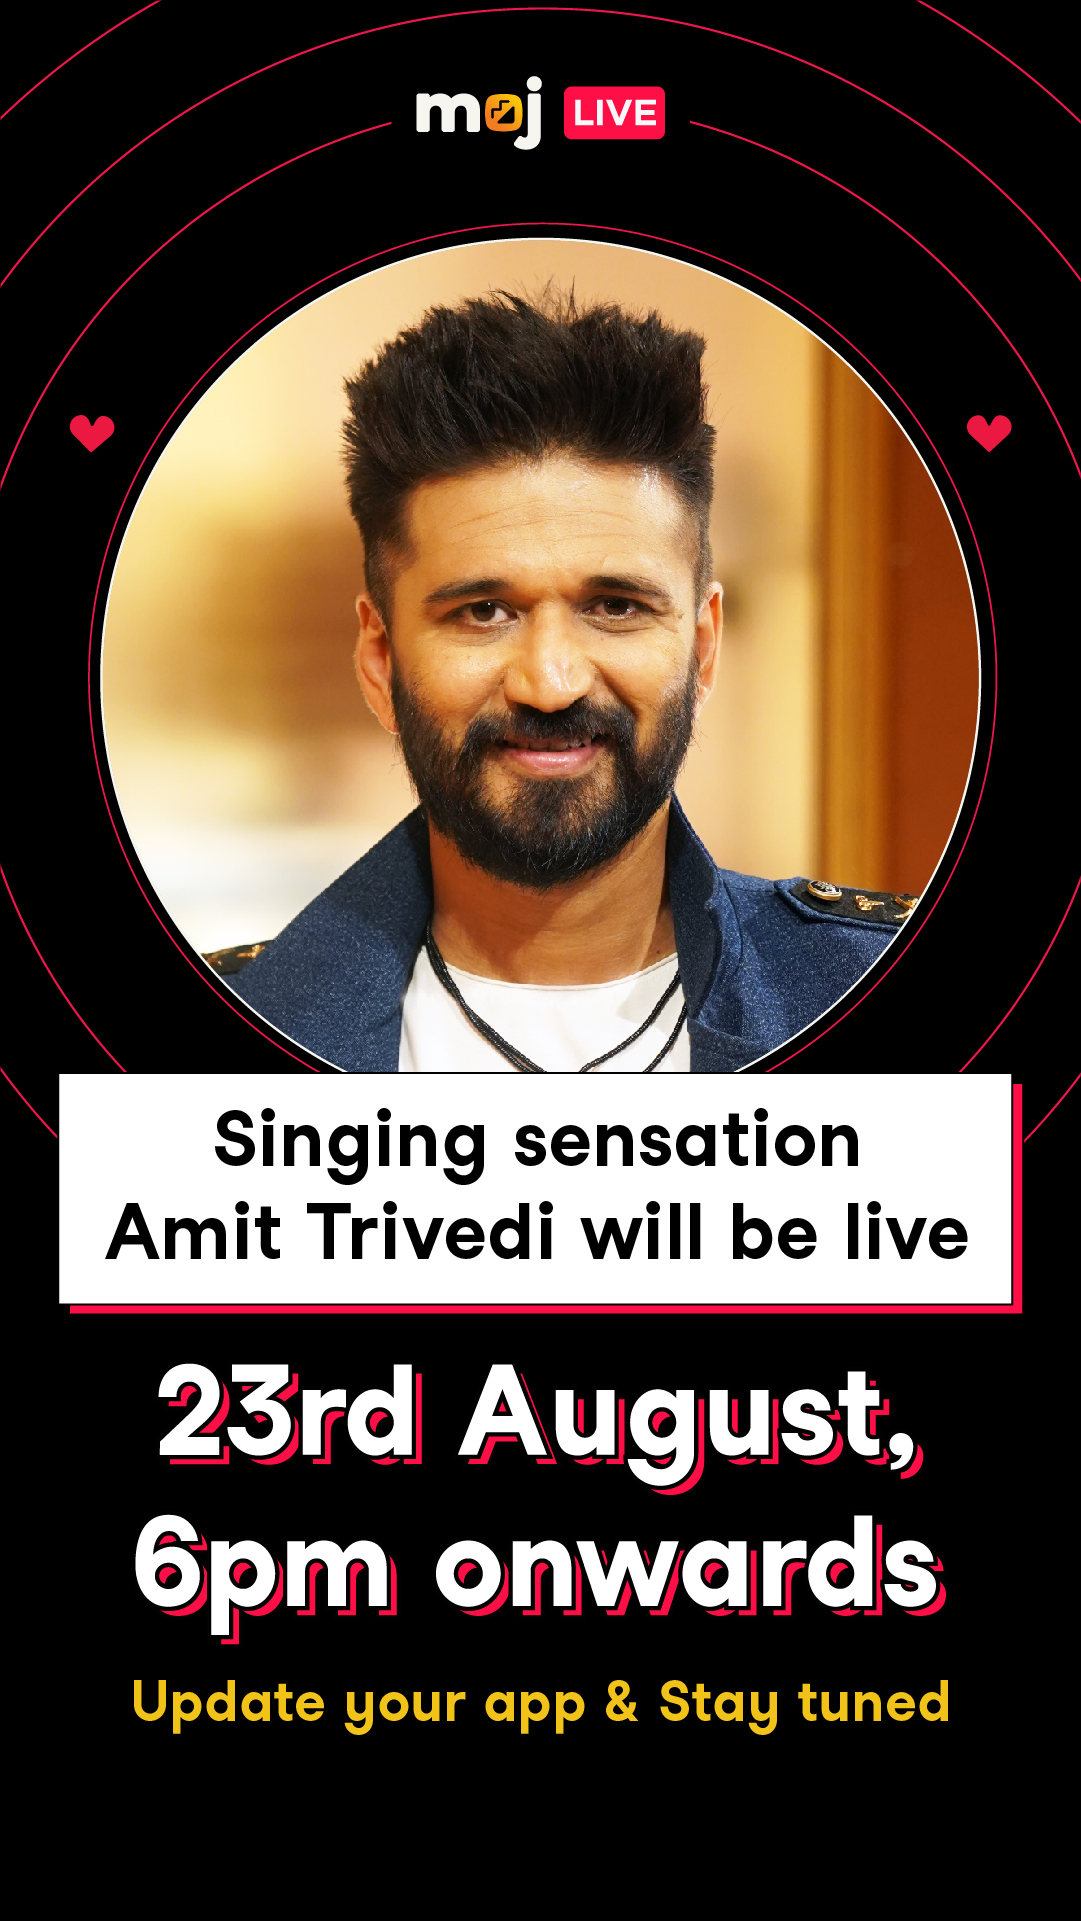 Catch Amit Trivedi LIVE on Moj as he shares some BTS gupshup about his new song ‘Samjhe Na.’, Online Event